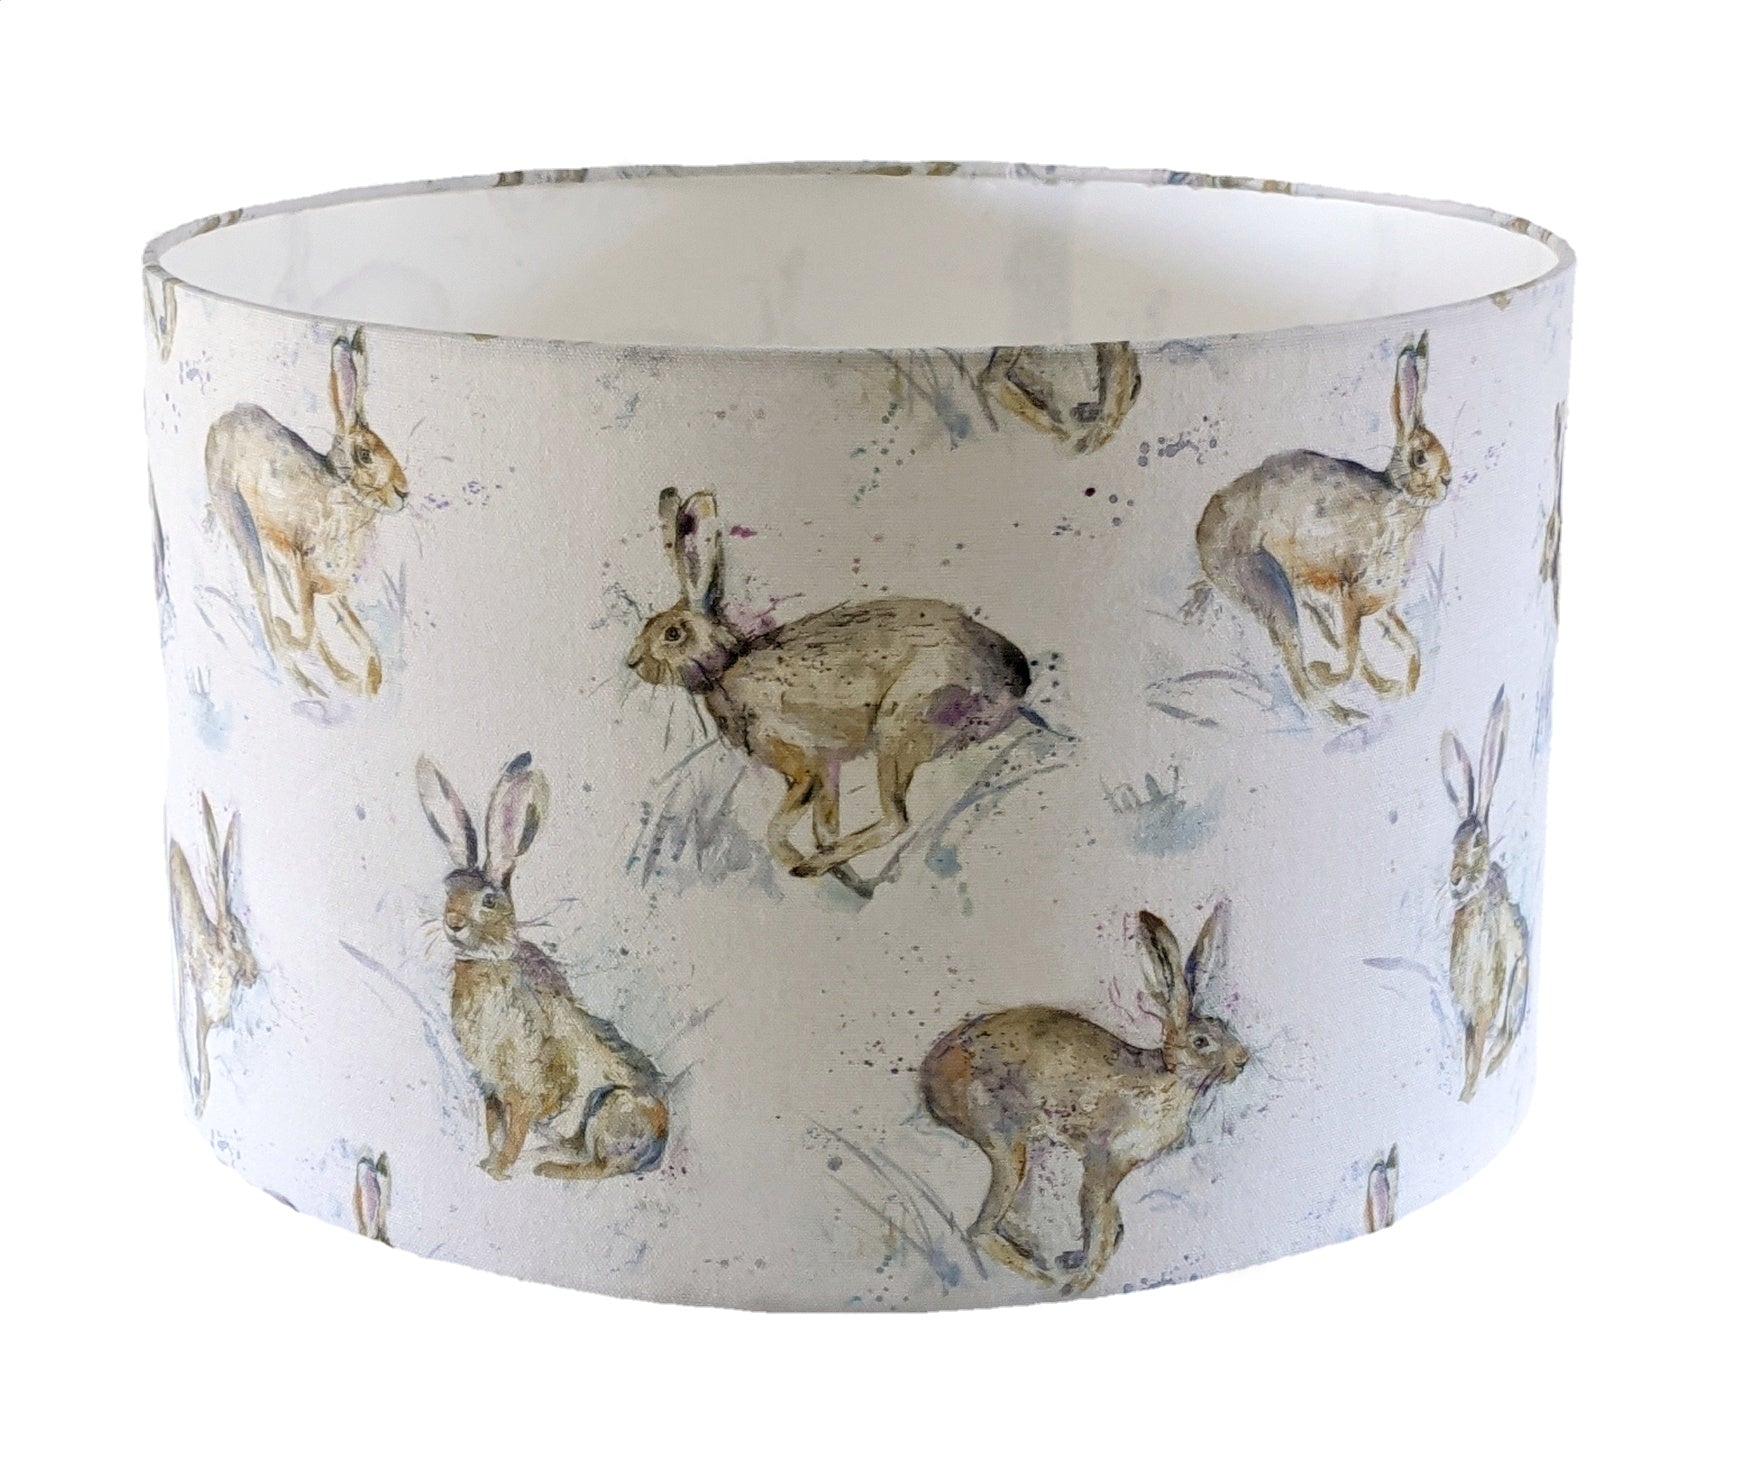 Voyage dashing hares for a ceiling pendant -  20cm, 30cm and 40cm